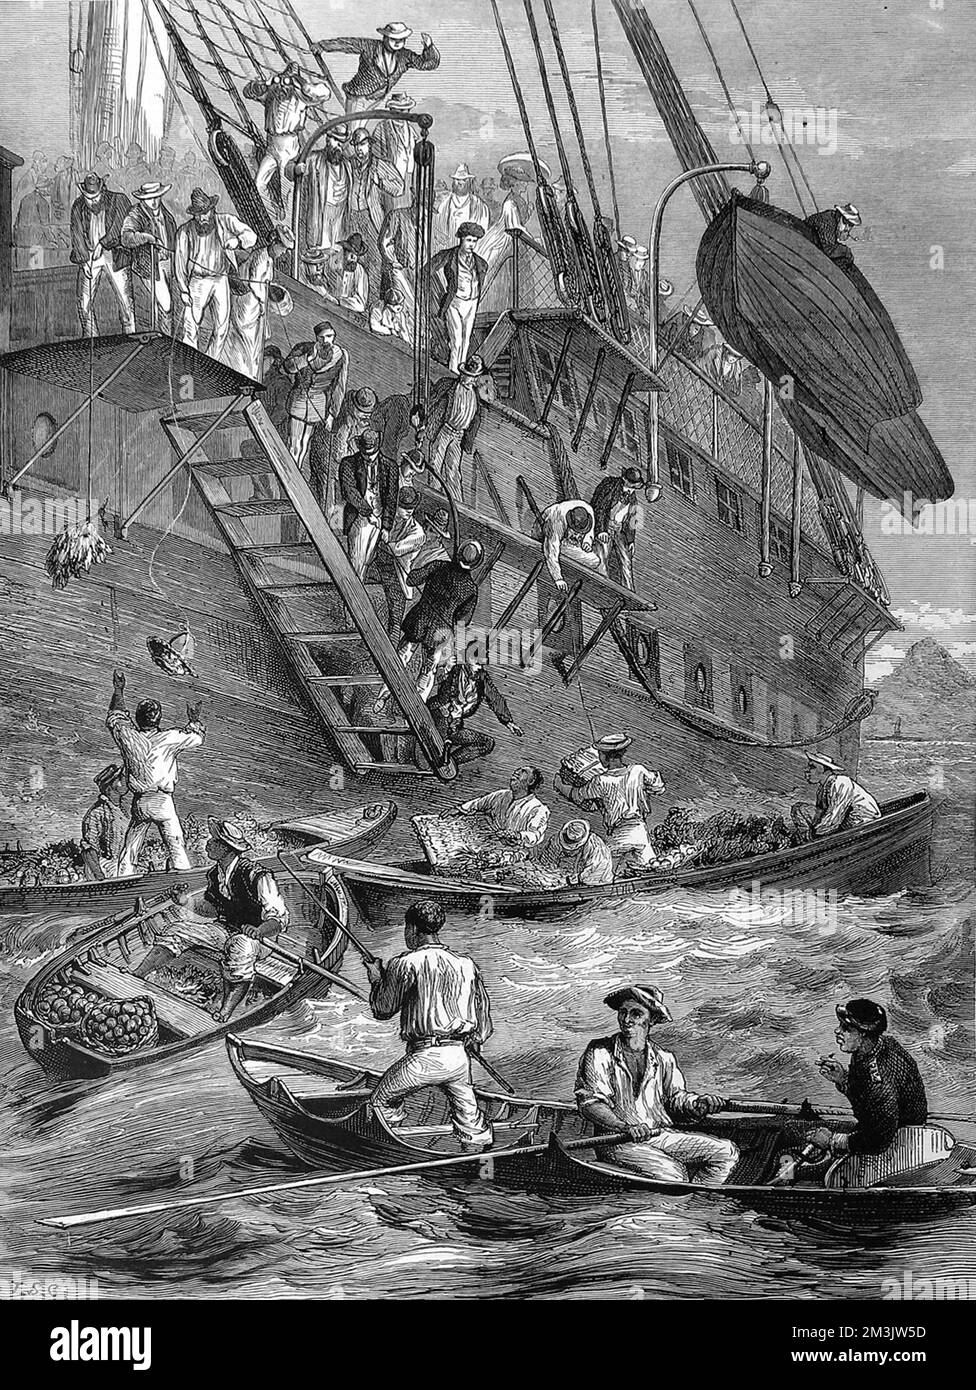 Passenger ship anchored off the Caribbean island of St. Vincent, in quarantine. In the foreground of the image can be seen local traders, in their little boats, bringing food out to the passenger ship.  1873 Stock Photo